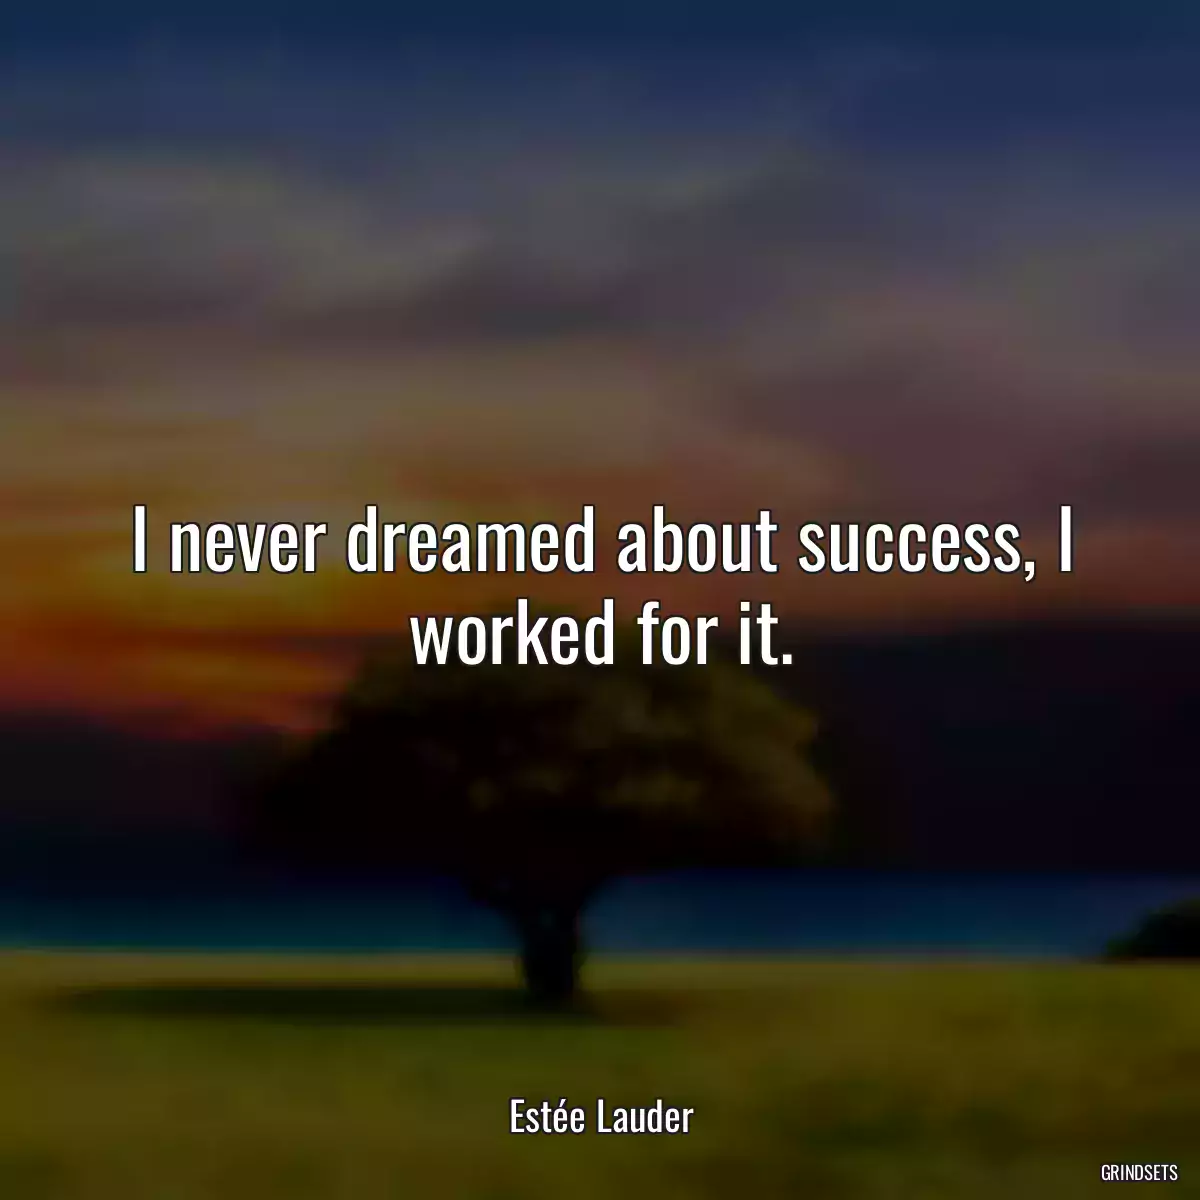 I never dreamed about success, I worked for it.